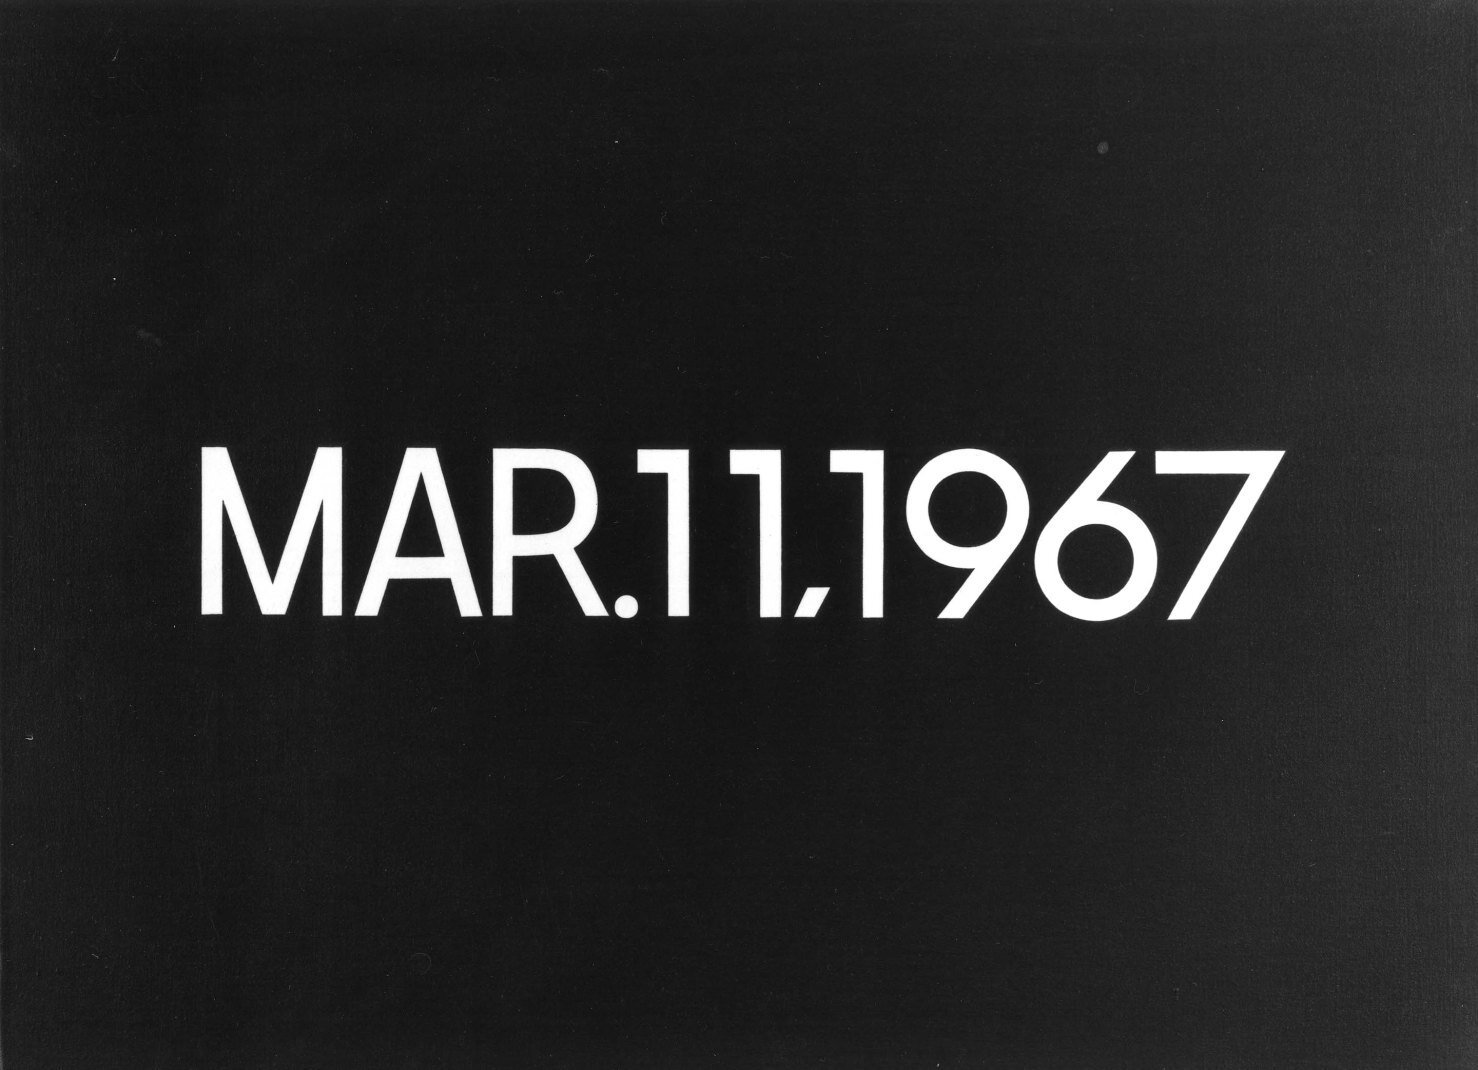 On Kawara, ‘Mar.11,1967,’ from the ‘Today’ series